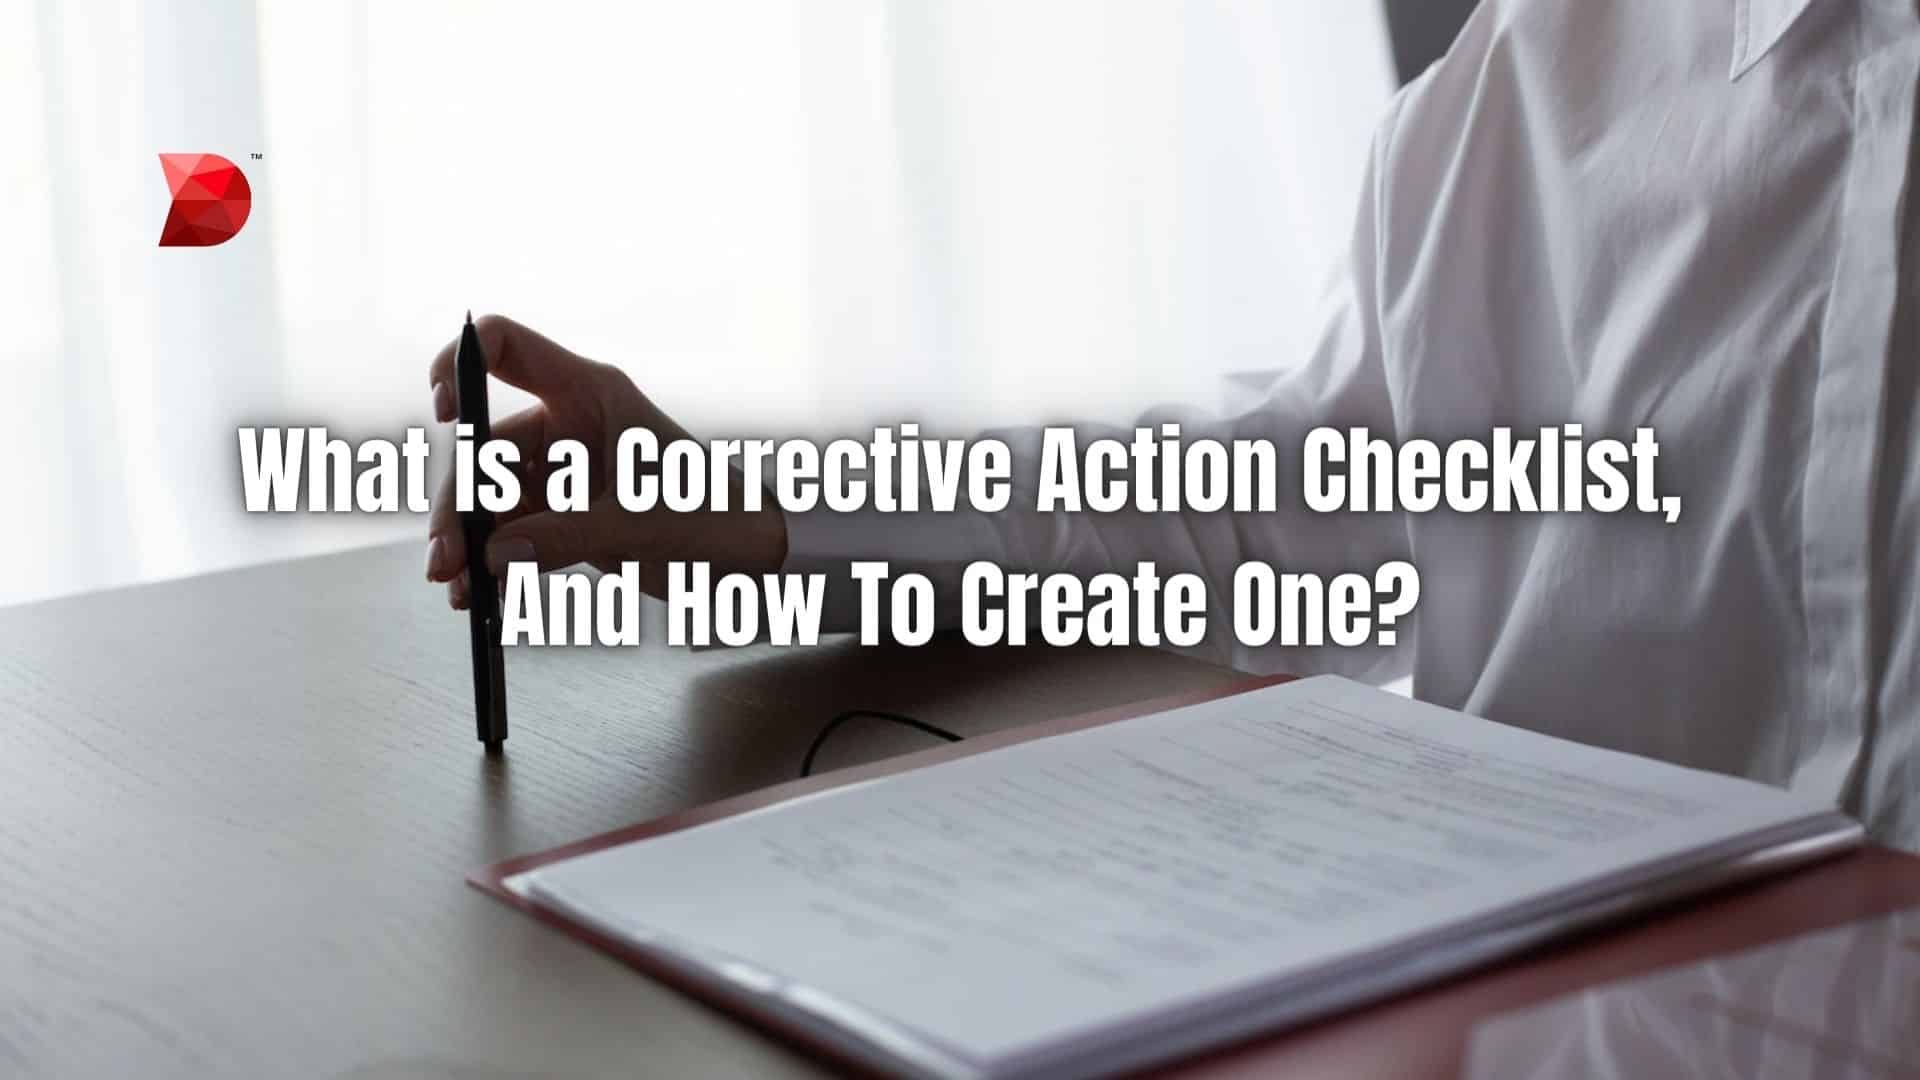 What is a Corrective Action Checklist, And How To Create One